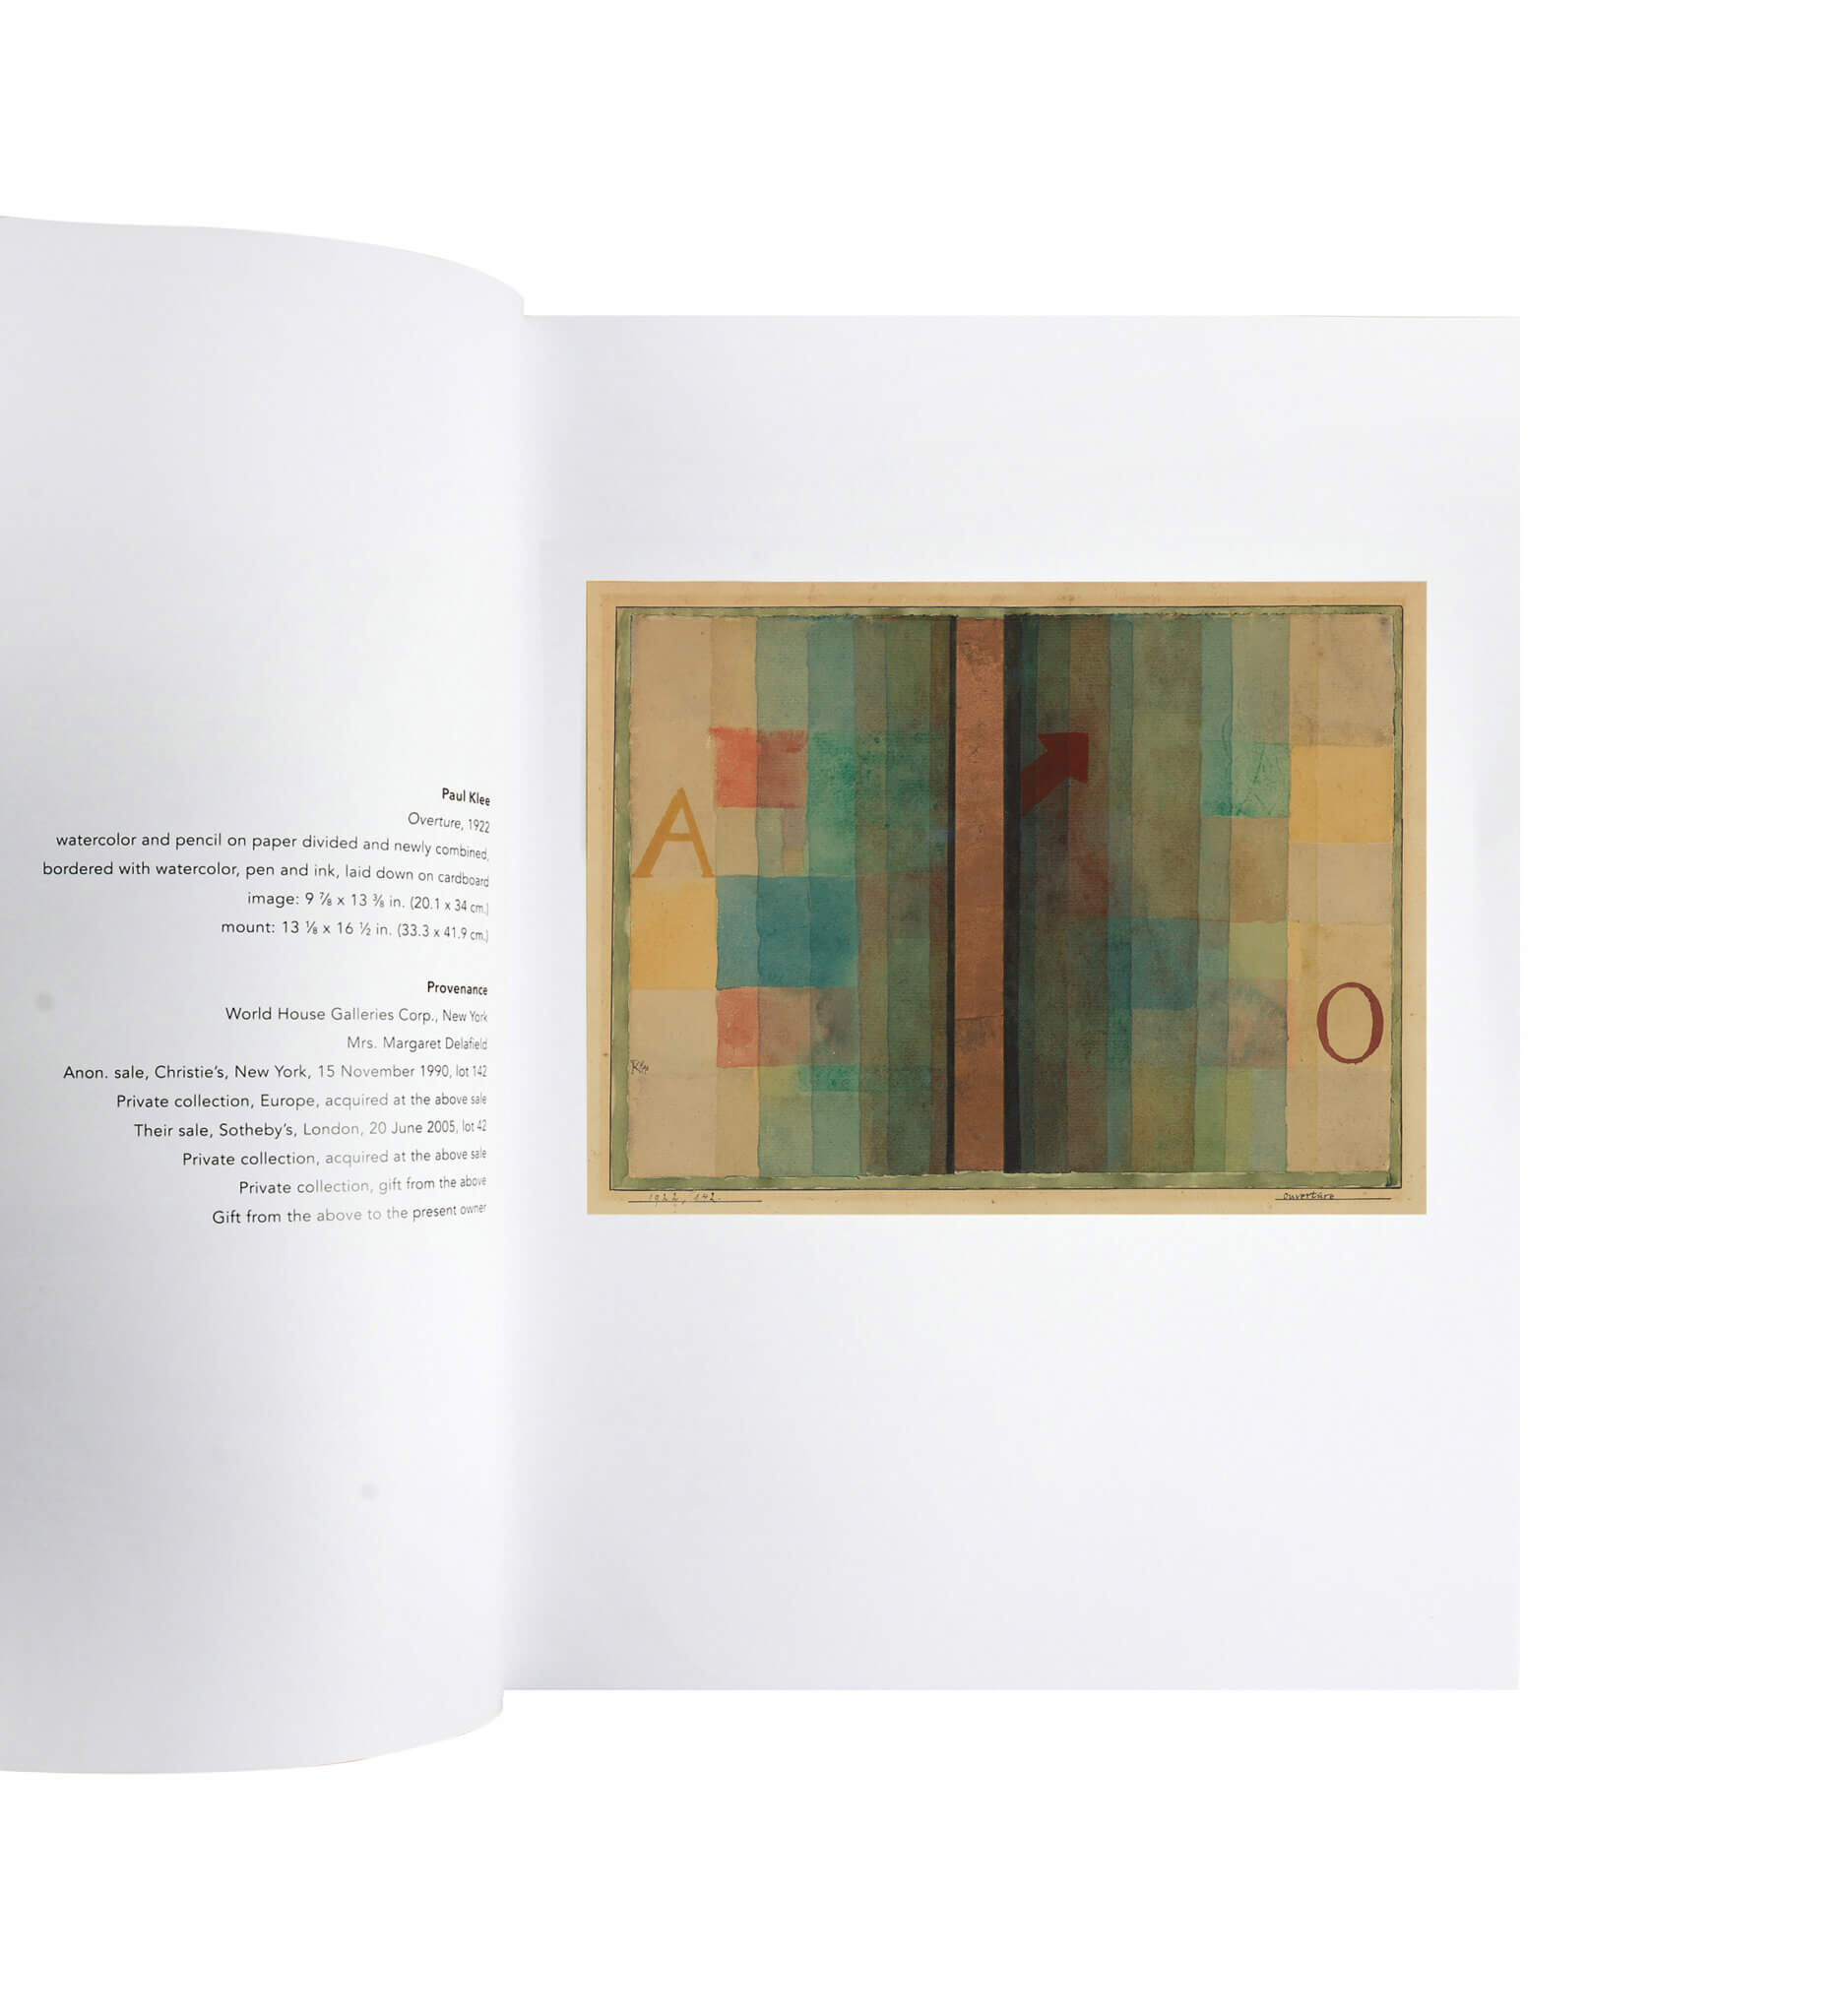 Words Exhibition Catalogue Product Photography